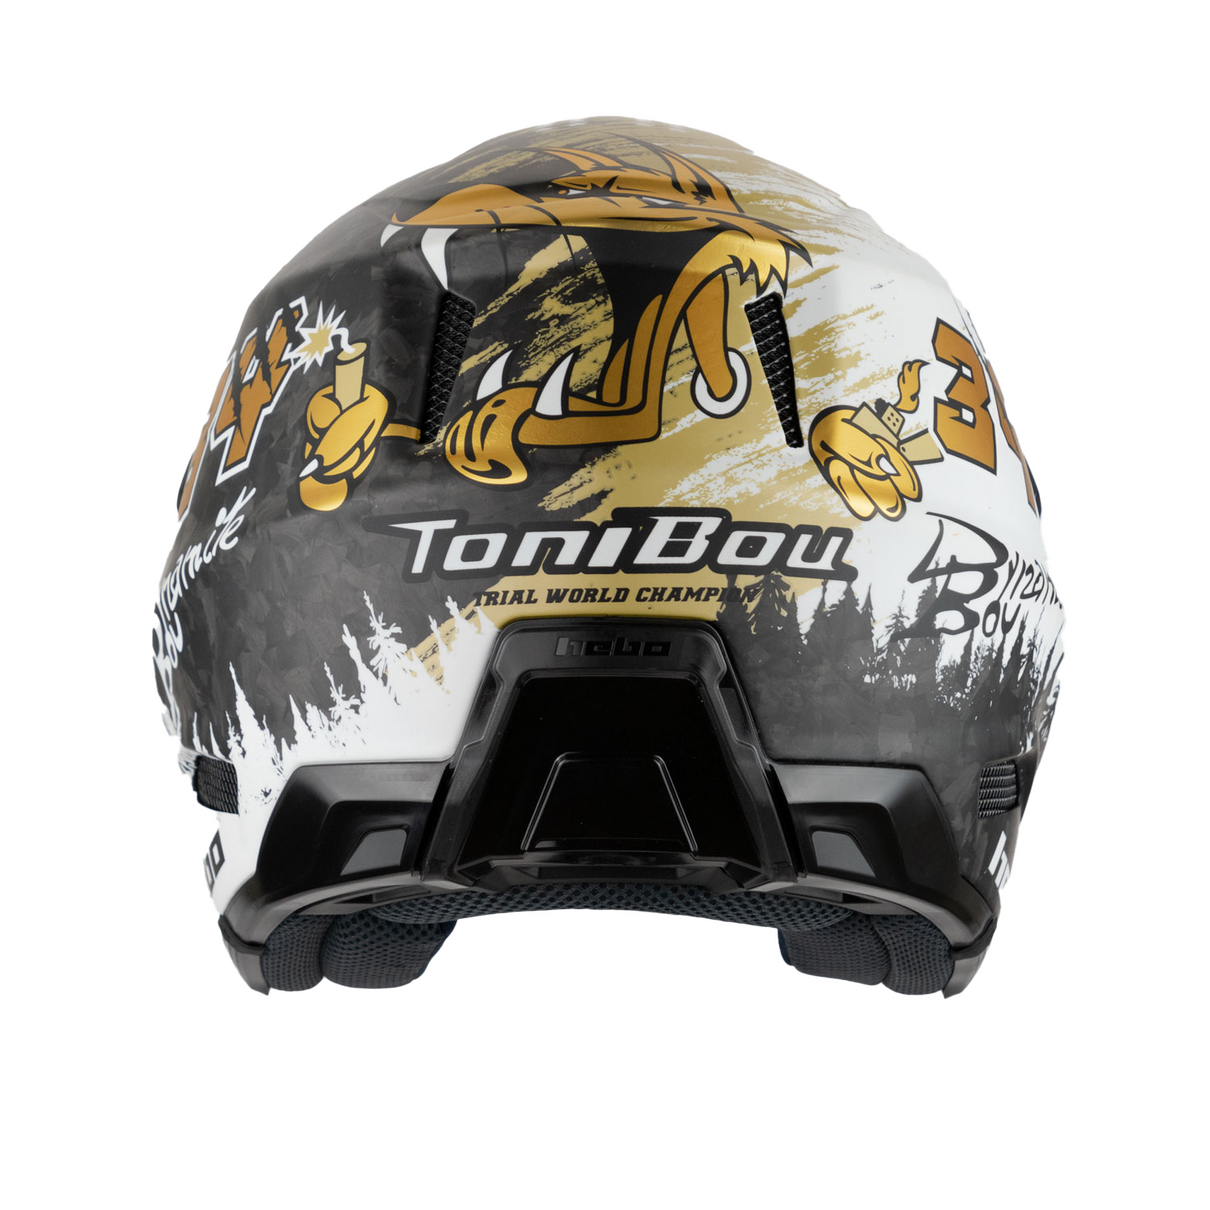 Hebo Trials Helmet Zone Race Toni Bou 34 Limited Edition